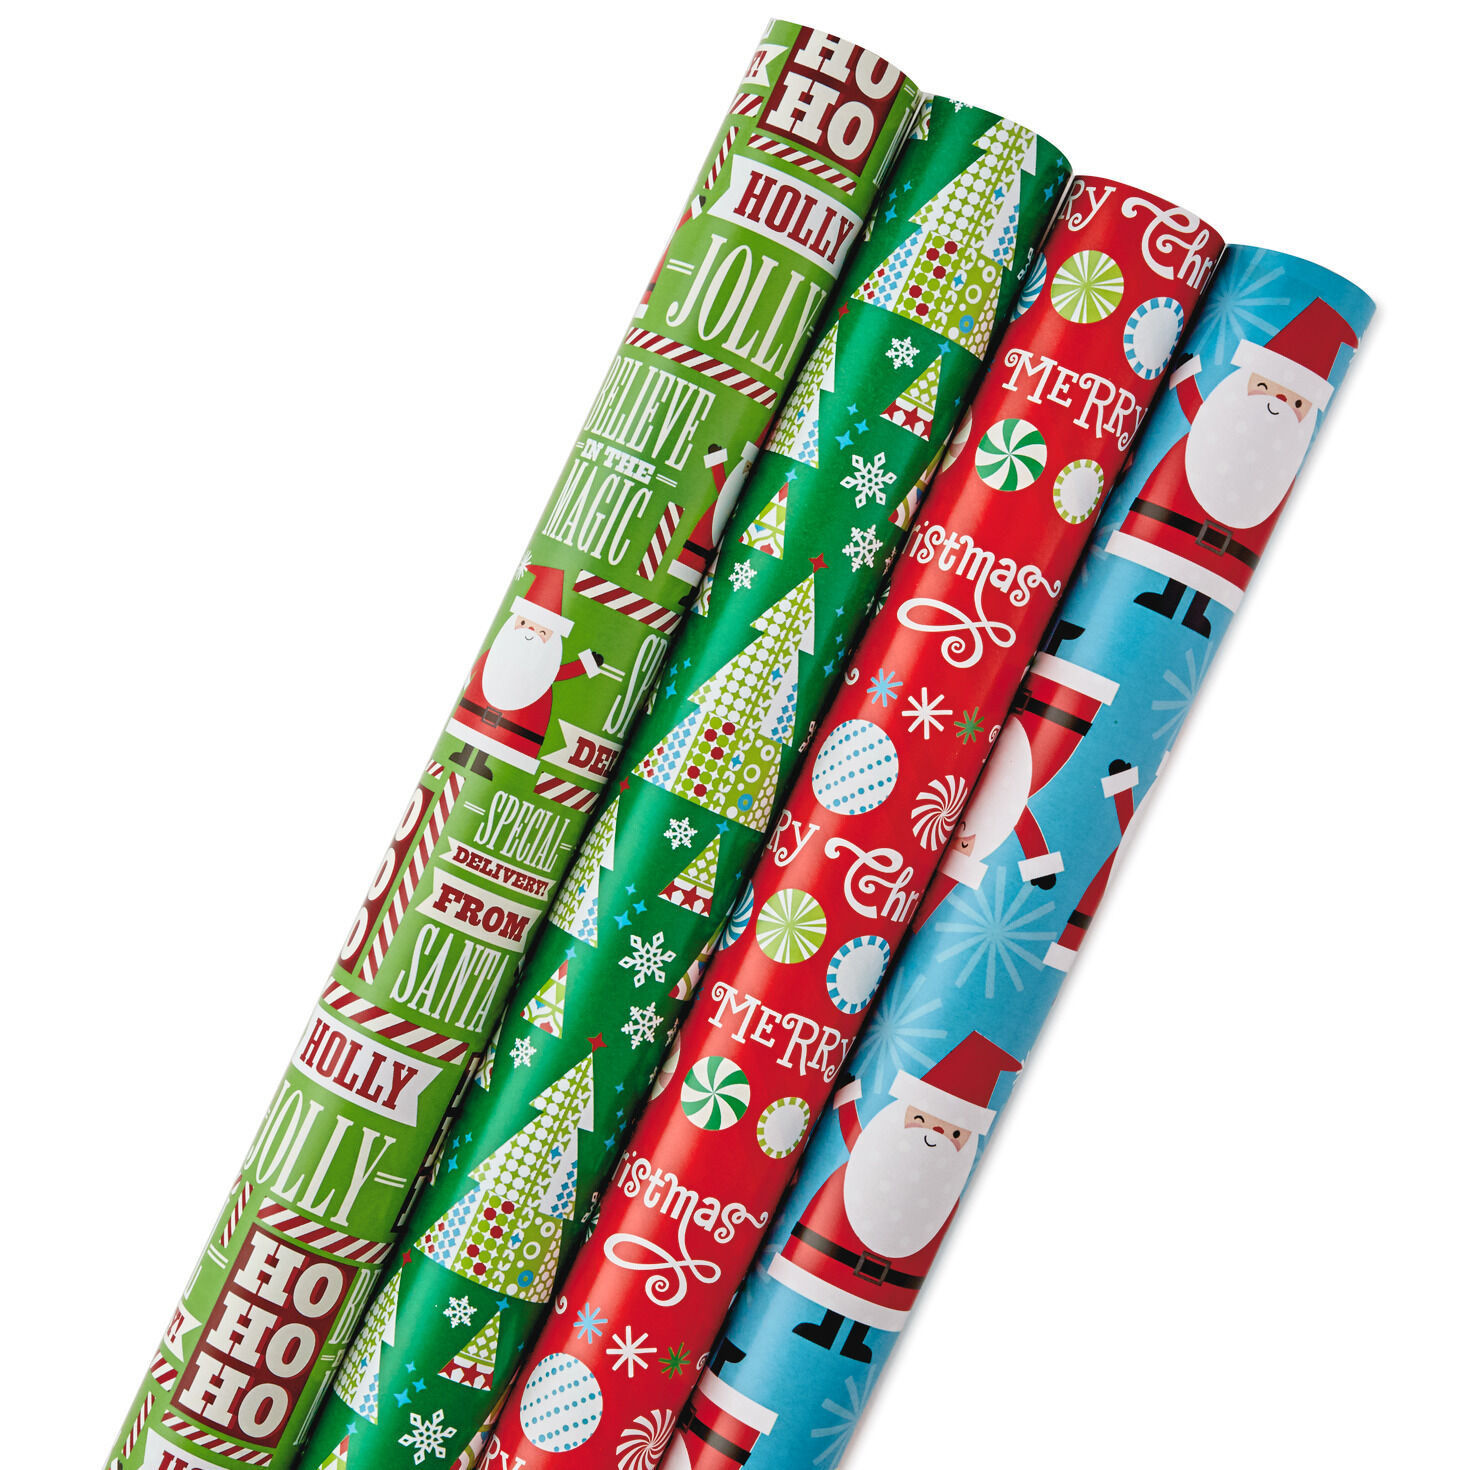 Hallmark, Party Supplies, Hallmark Wrapping Paper Christmas Merry Bright  Red 9 Sq Ft Jumbo Roll Holiday